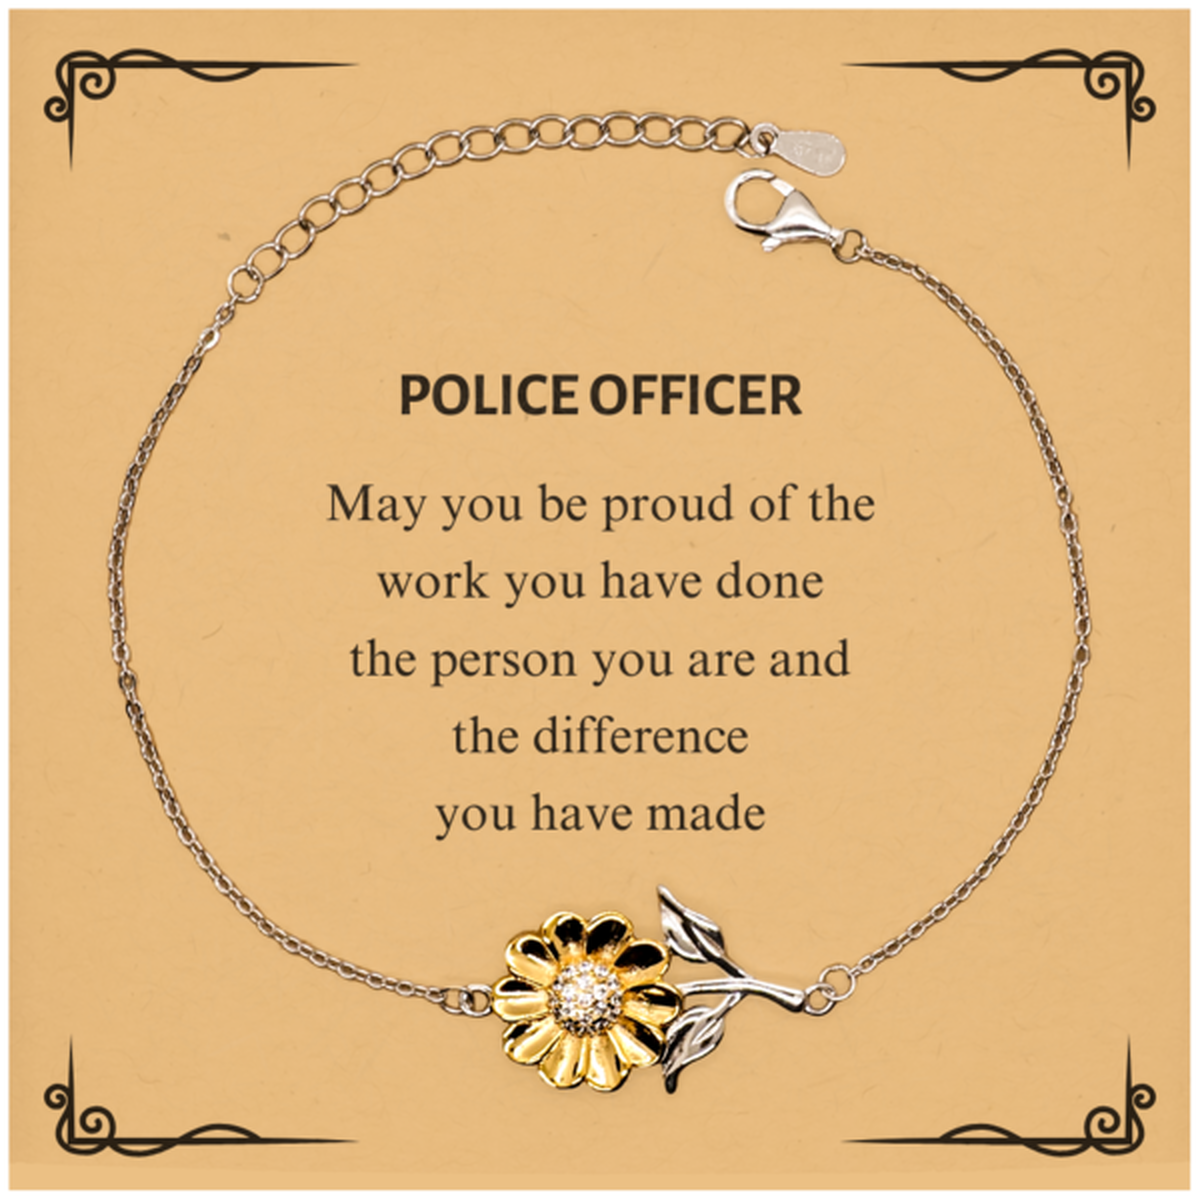 Police Officer May you be proud of the work you have done, Retirement Police Officer Sunflower Bracelet for Colleague Appreciation Gifts Amazing for Police Officer